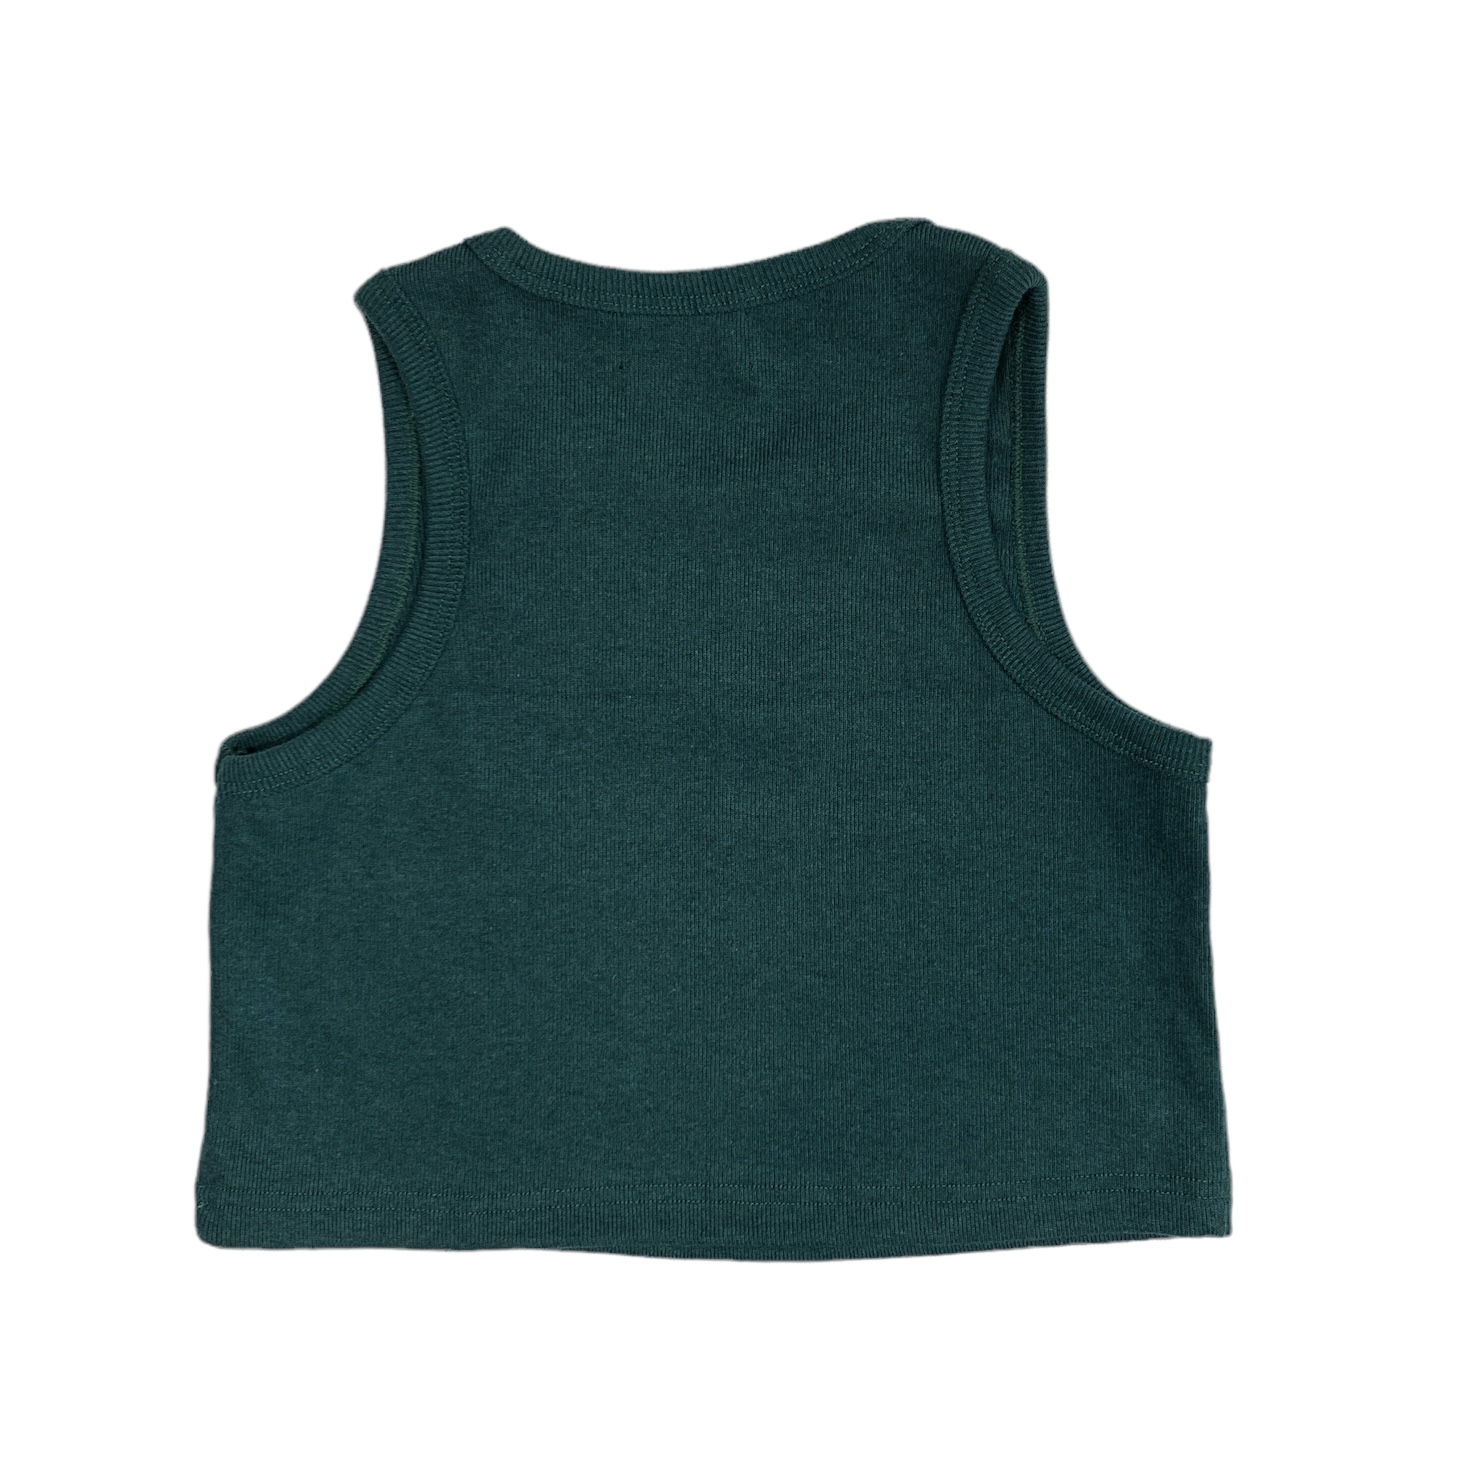 "ABBY" Tank Top (Turquoise)